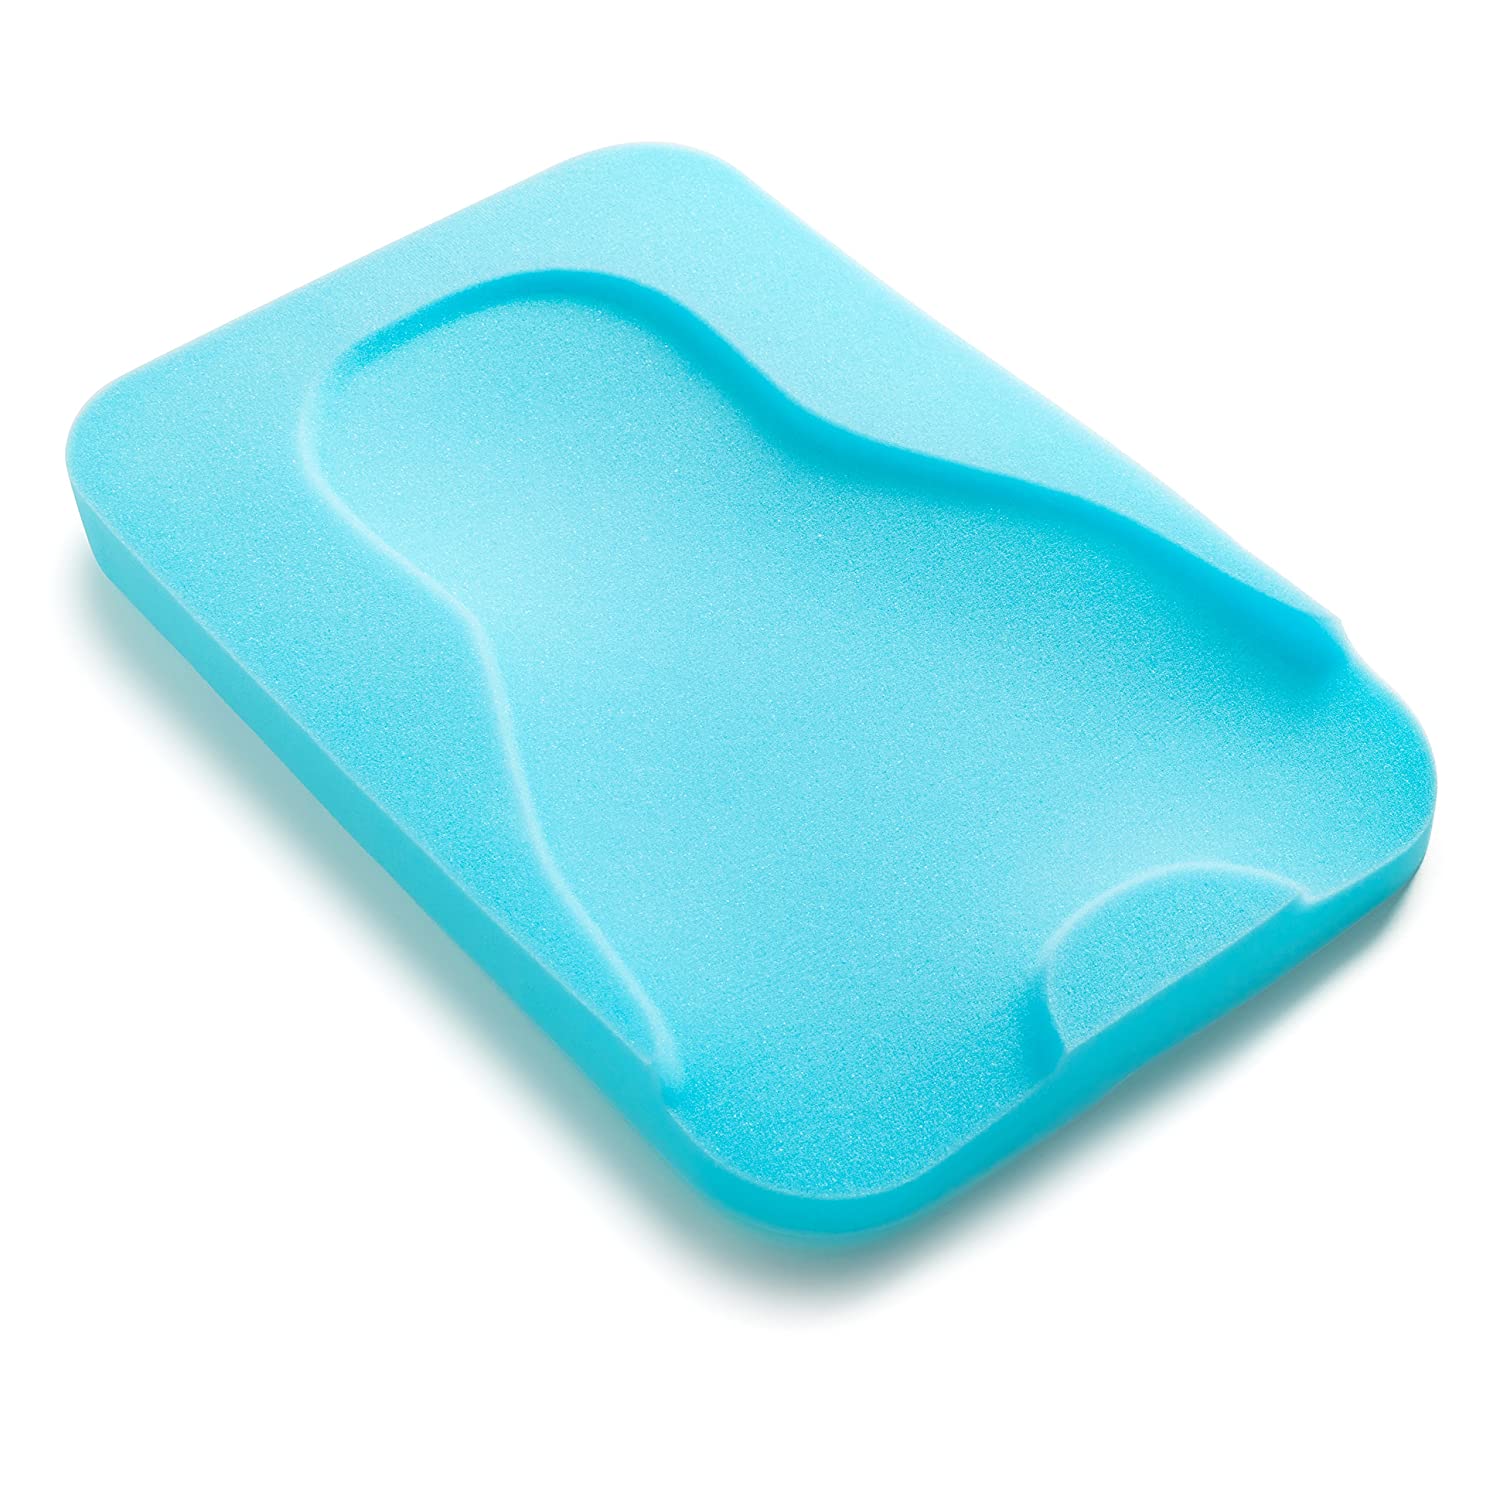 8 Best Baby Bath Sponges 2023 - Buying Guide & Reviews 1